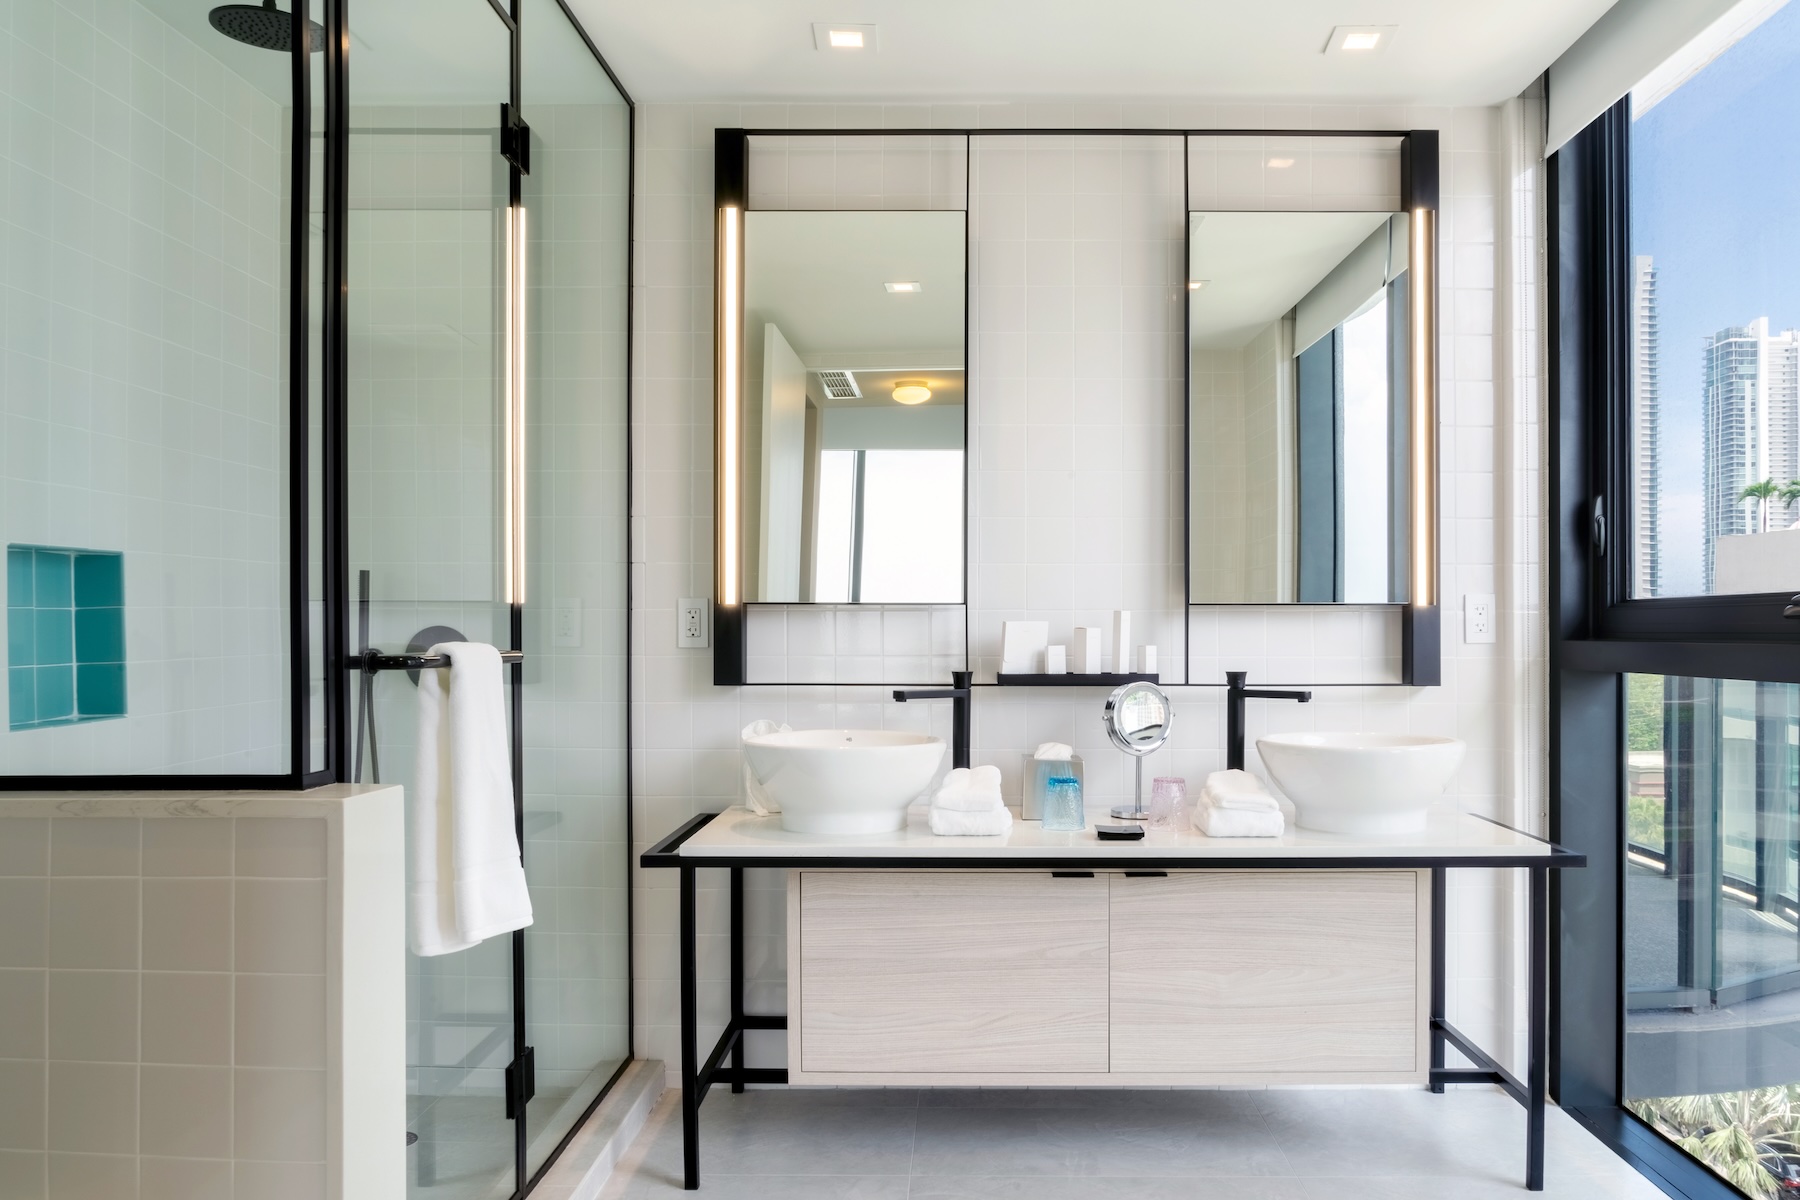 A modern bathroom with two sinks in the centre of the image, with walk in glassed shower on the left, and floor to ceiling window with city views